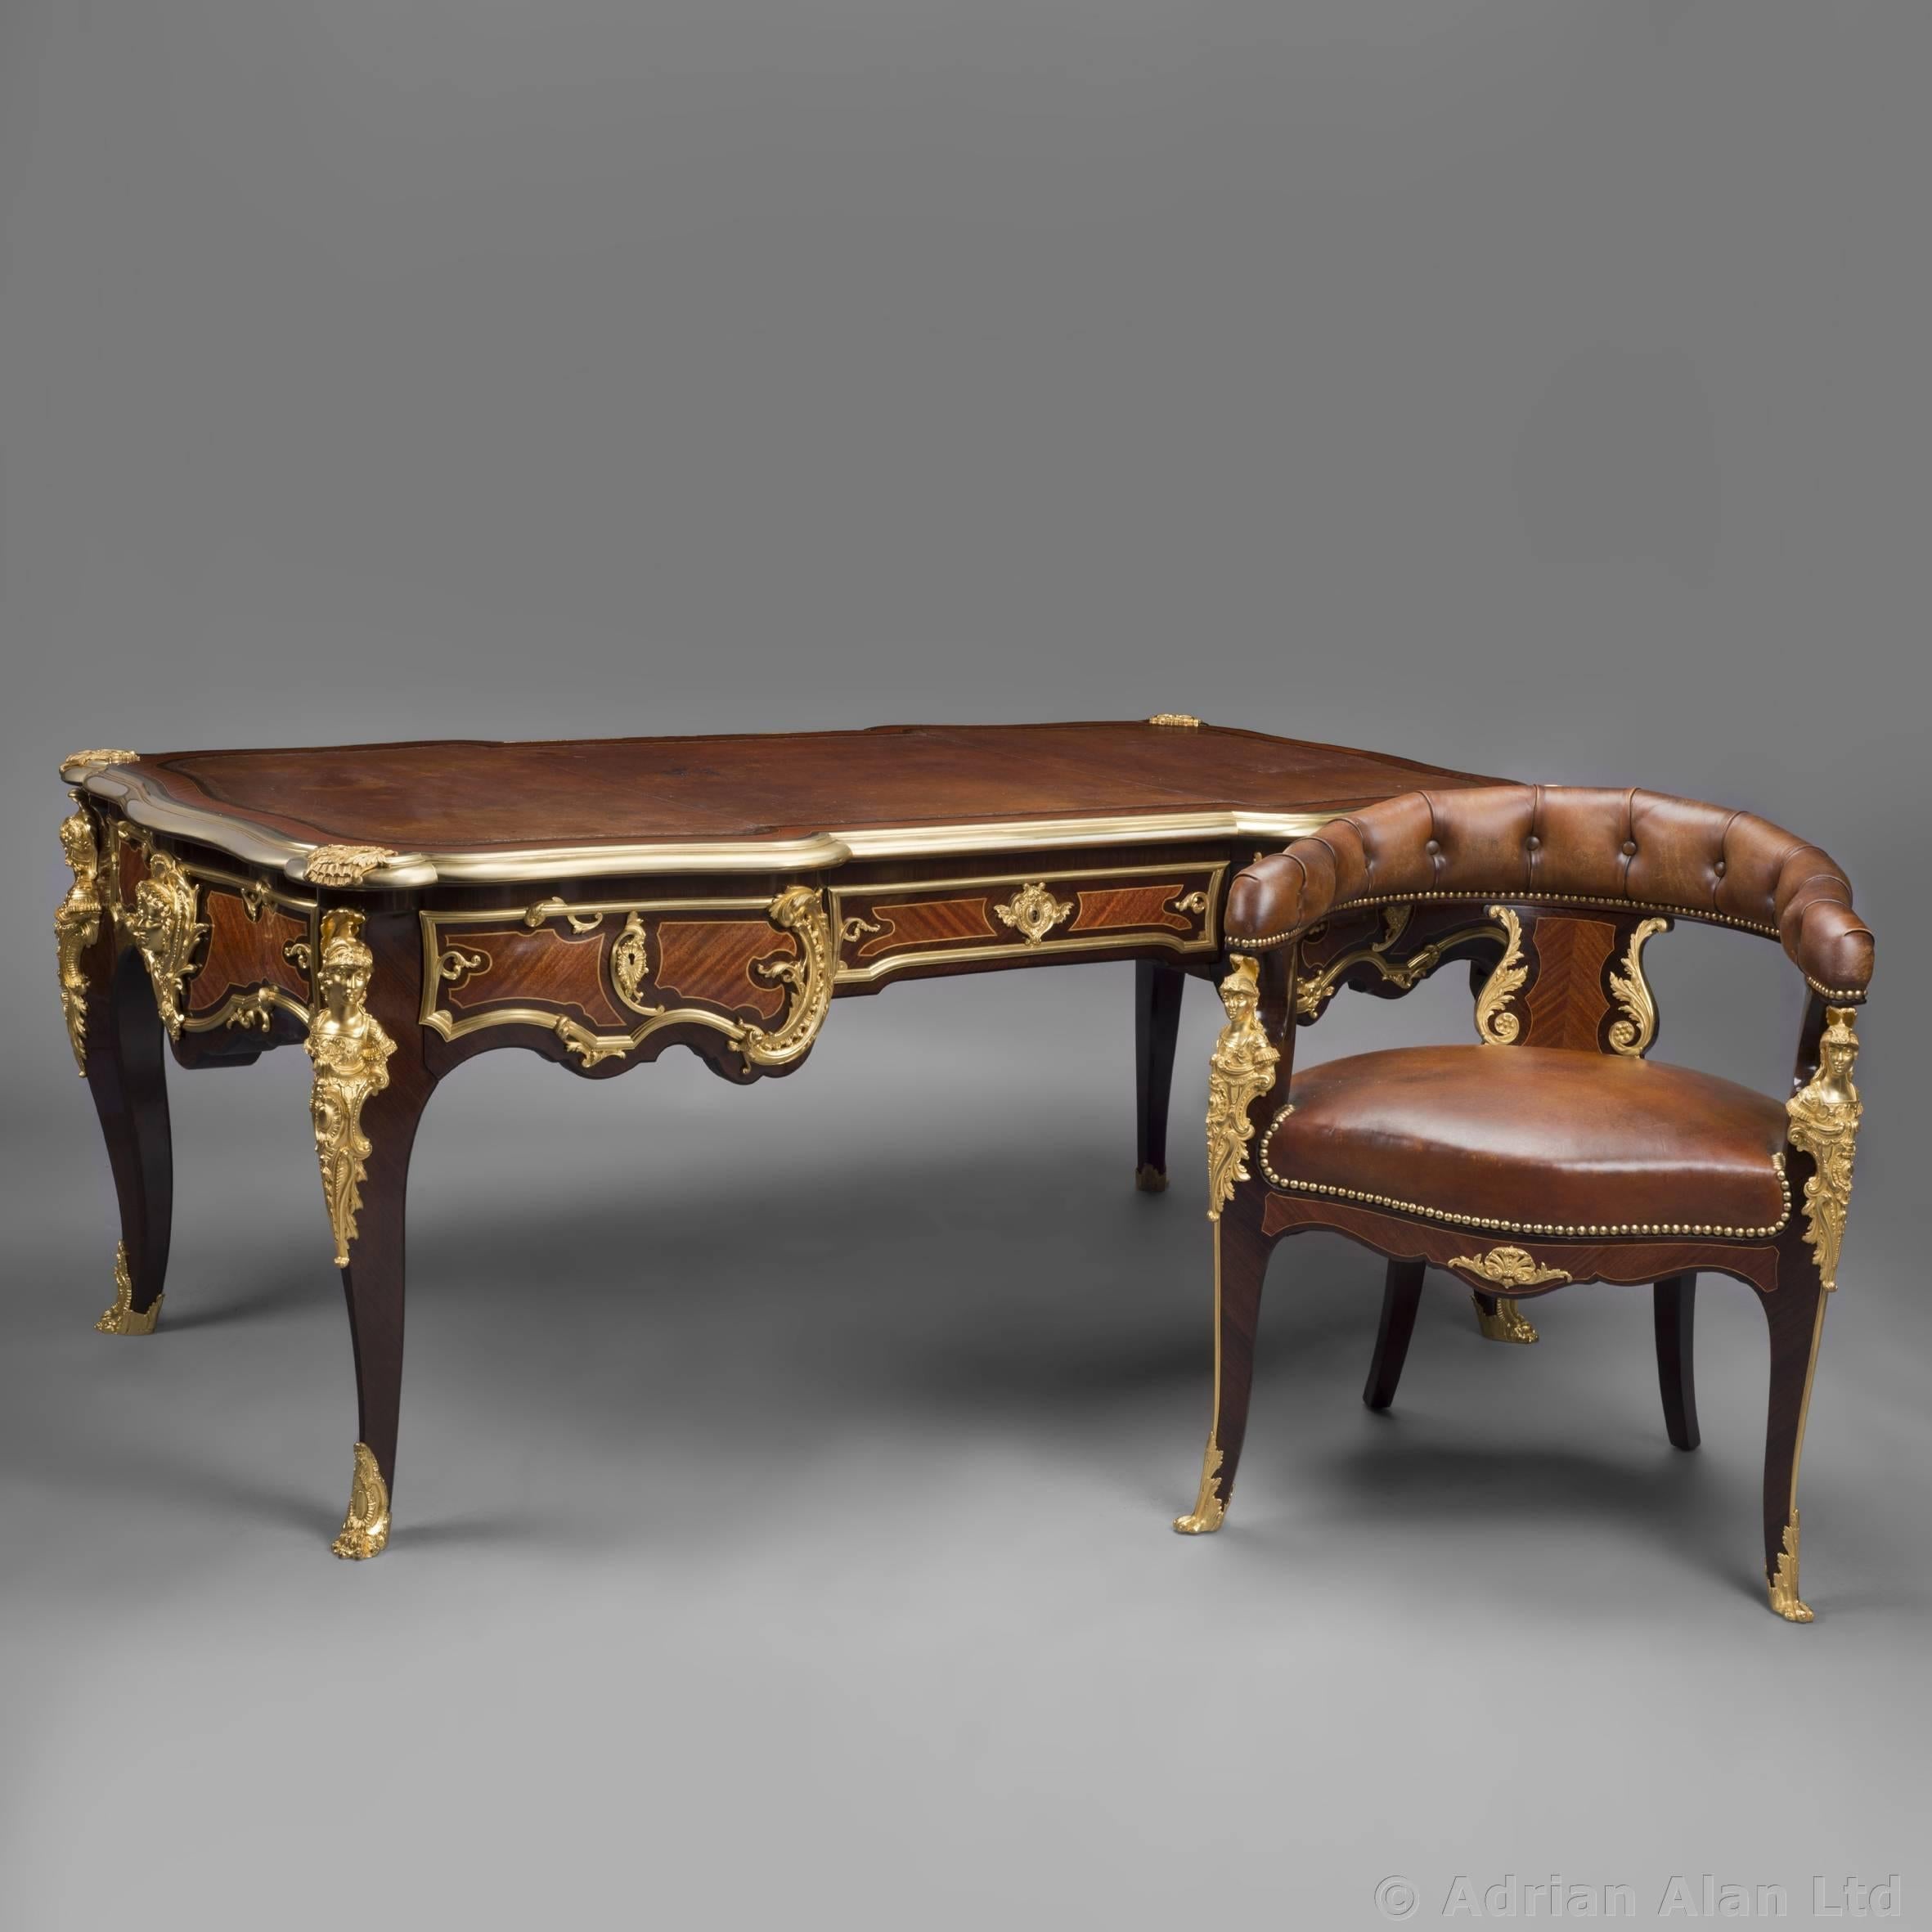 ‘Bureau Plat à Têtes De Guerriers Antiques‘, an important Regence style gilt bronze-mounted kingwood and tulipwood Bureau plat after the model by Charles Cressent, by Repute from the collection of Emil Glückstadt, Denmark’s ‘Napoleon of